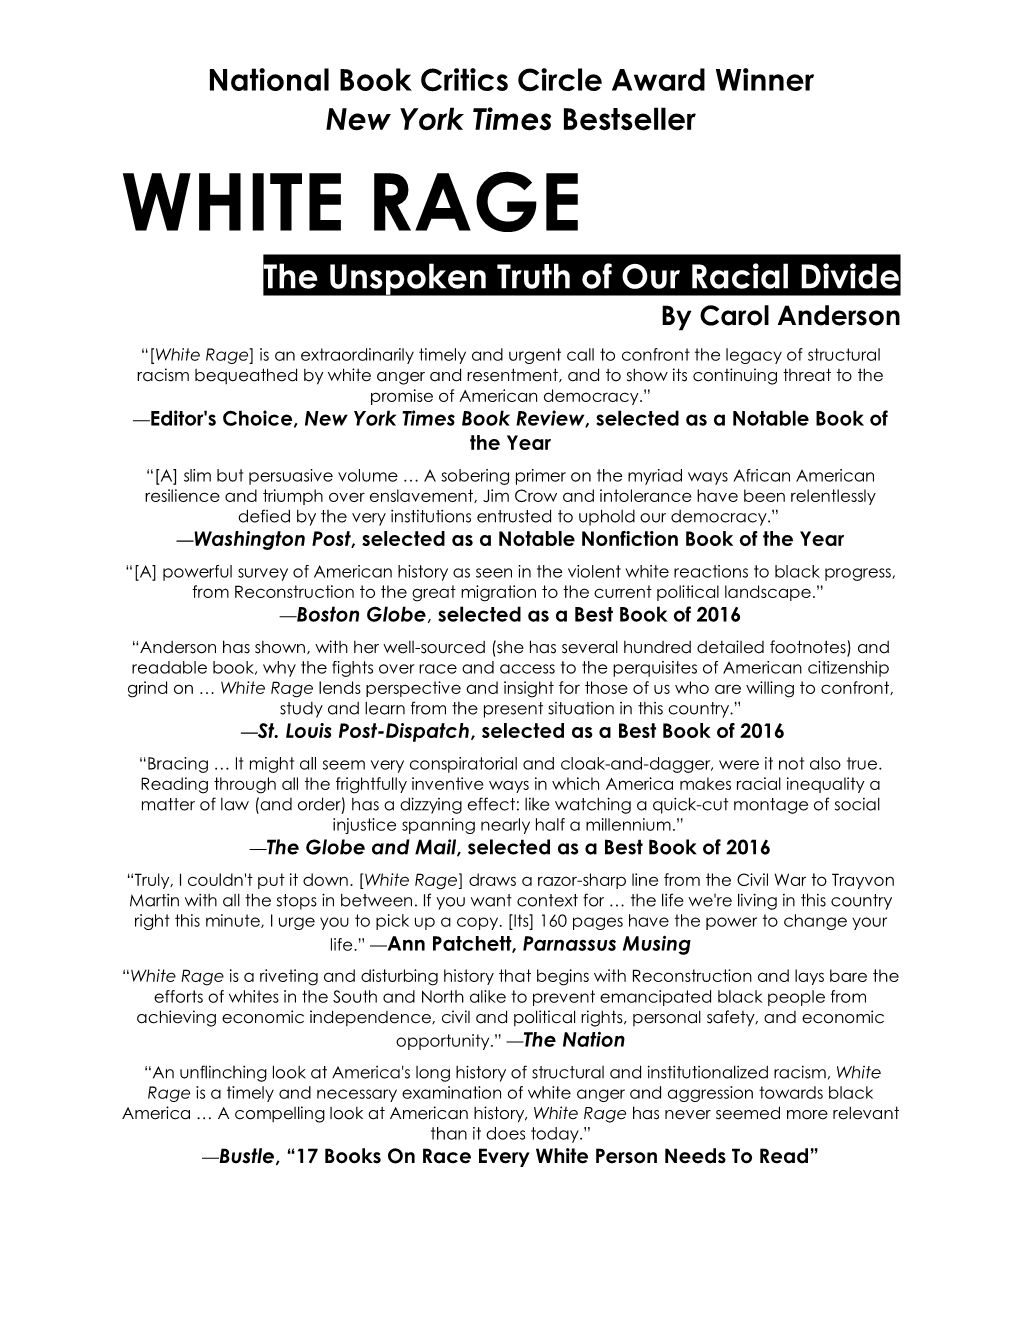 WHITE RAGE the Unspoken Truth of Our Racial Divide by Carol Anderson